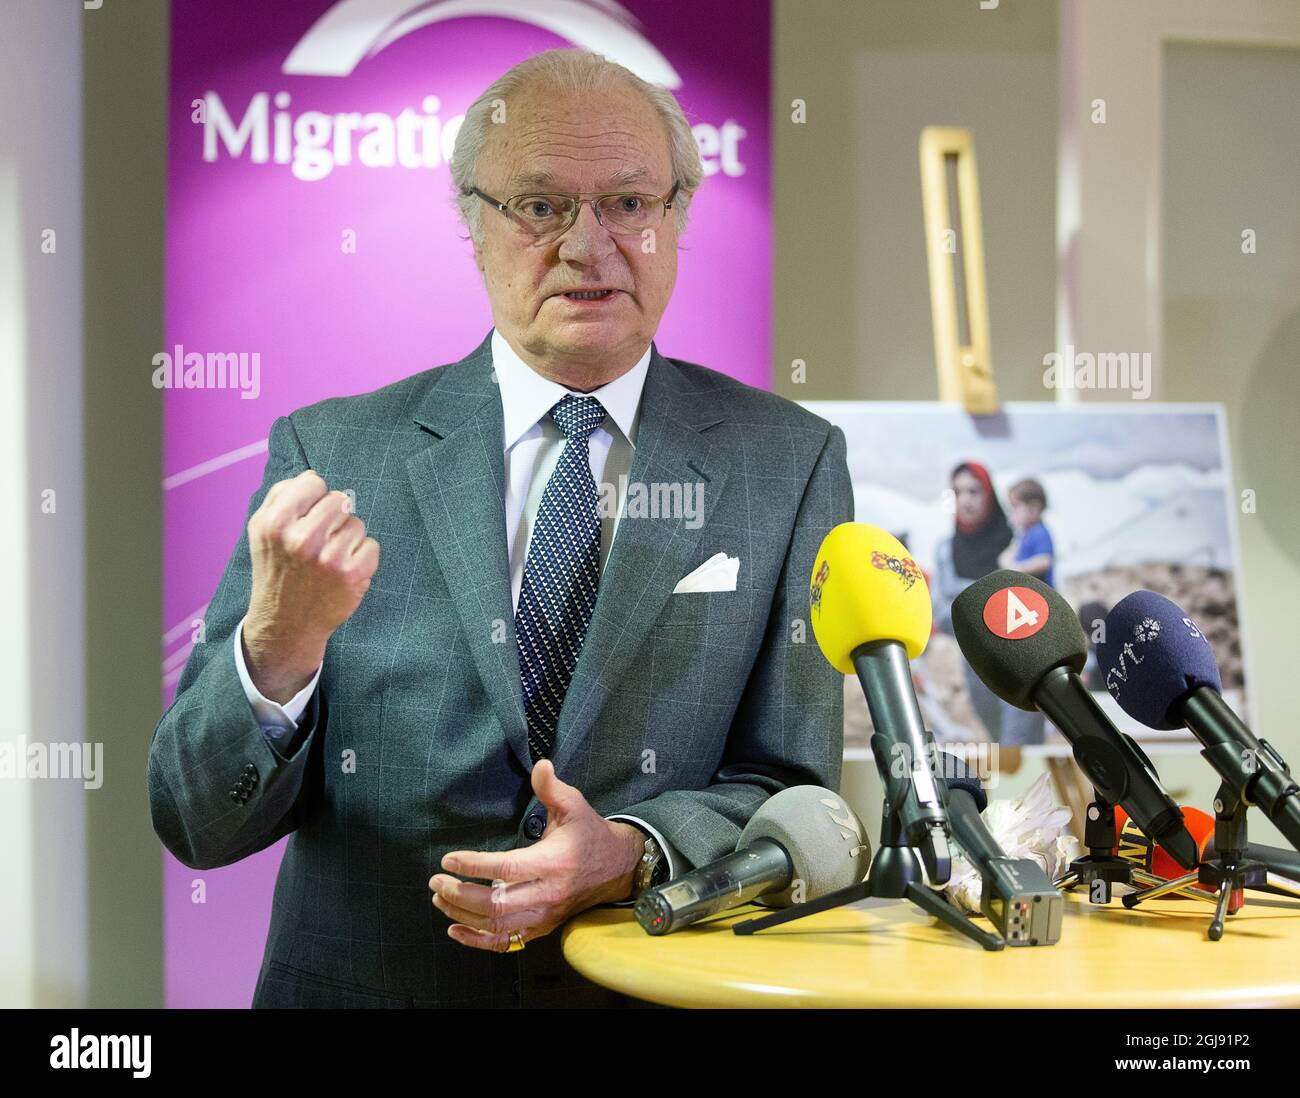 NORRKOPING 2015-02-20 King Carl Gustaf is seen during his visit to Â“The Migration BoardÂ” of Sweden in Norrkoping, Sweden, February 20, 2015. The Migration Board handles application for immigration to Sweden. Foto: Stefan Jerrevang / TT / Kod 60160  Stock Photo